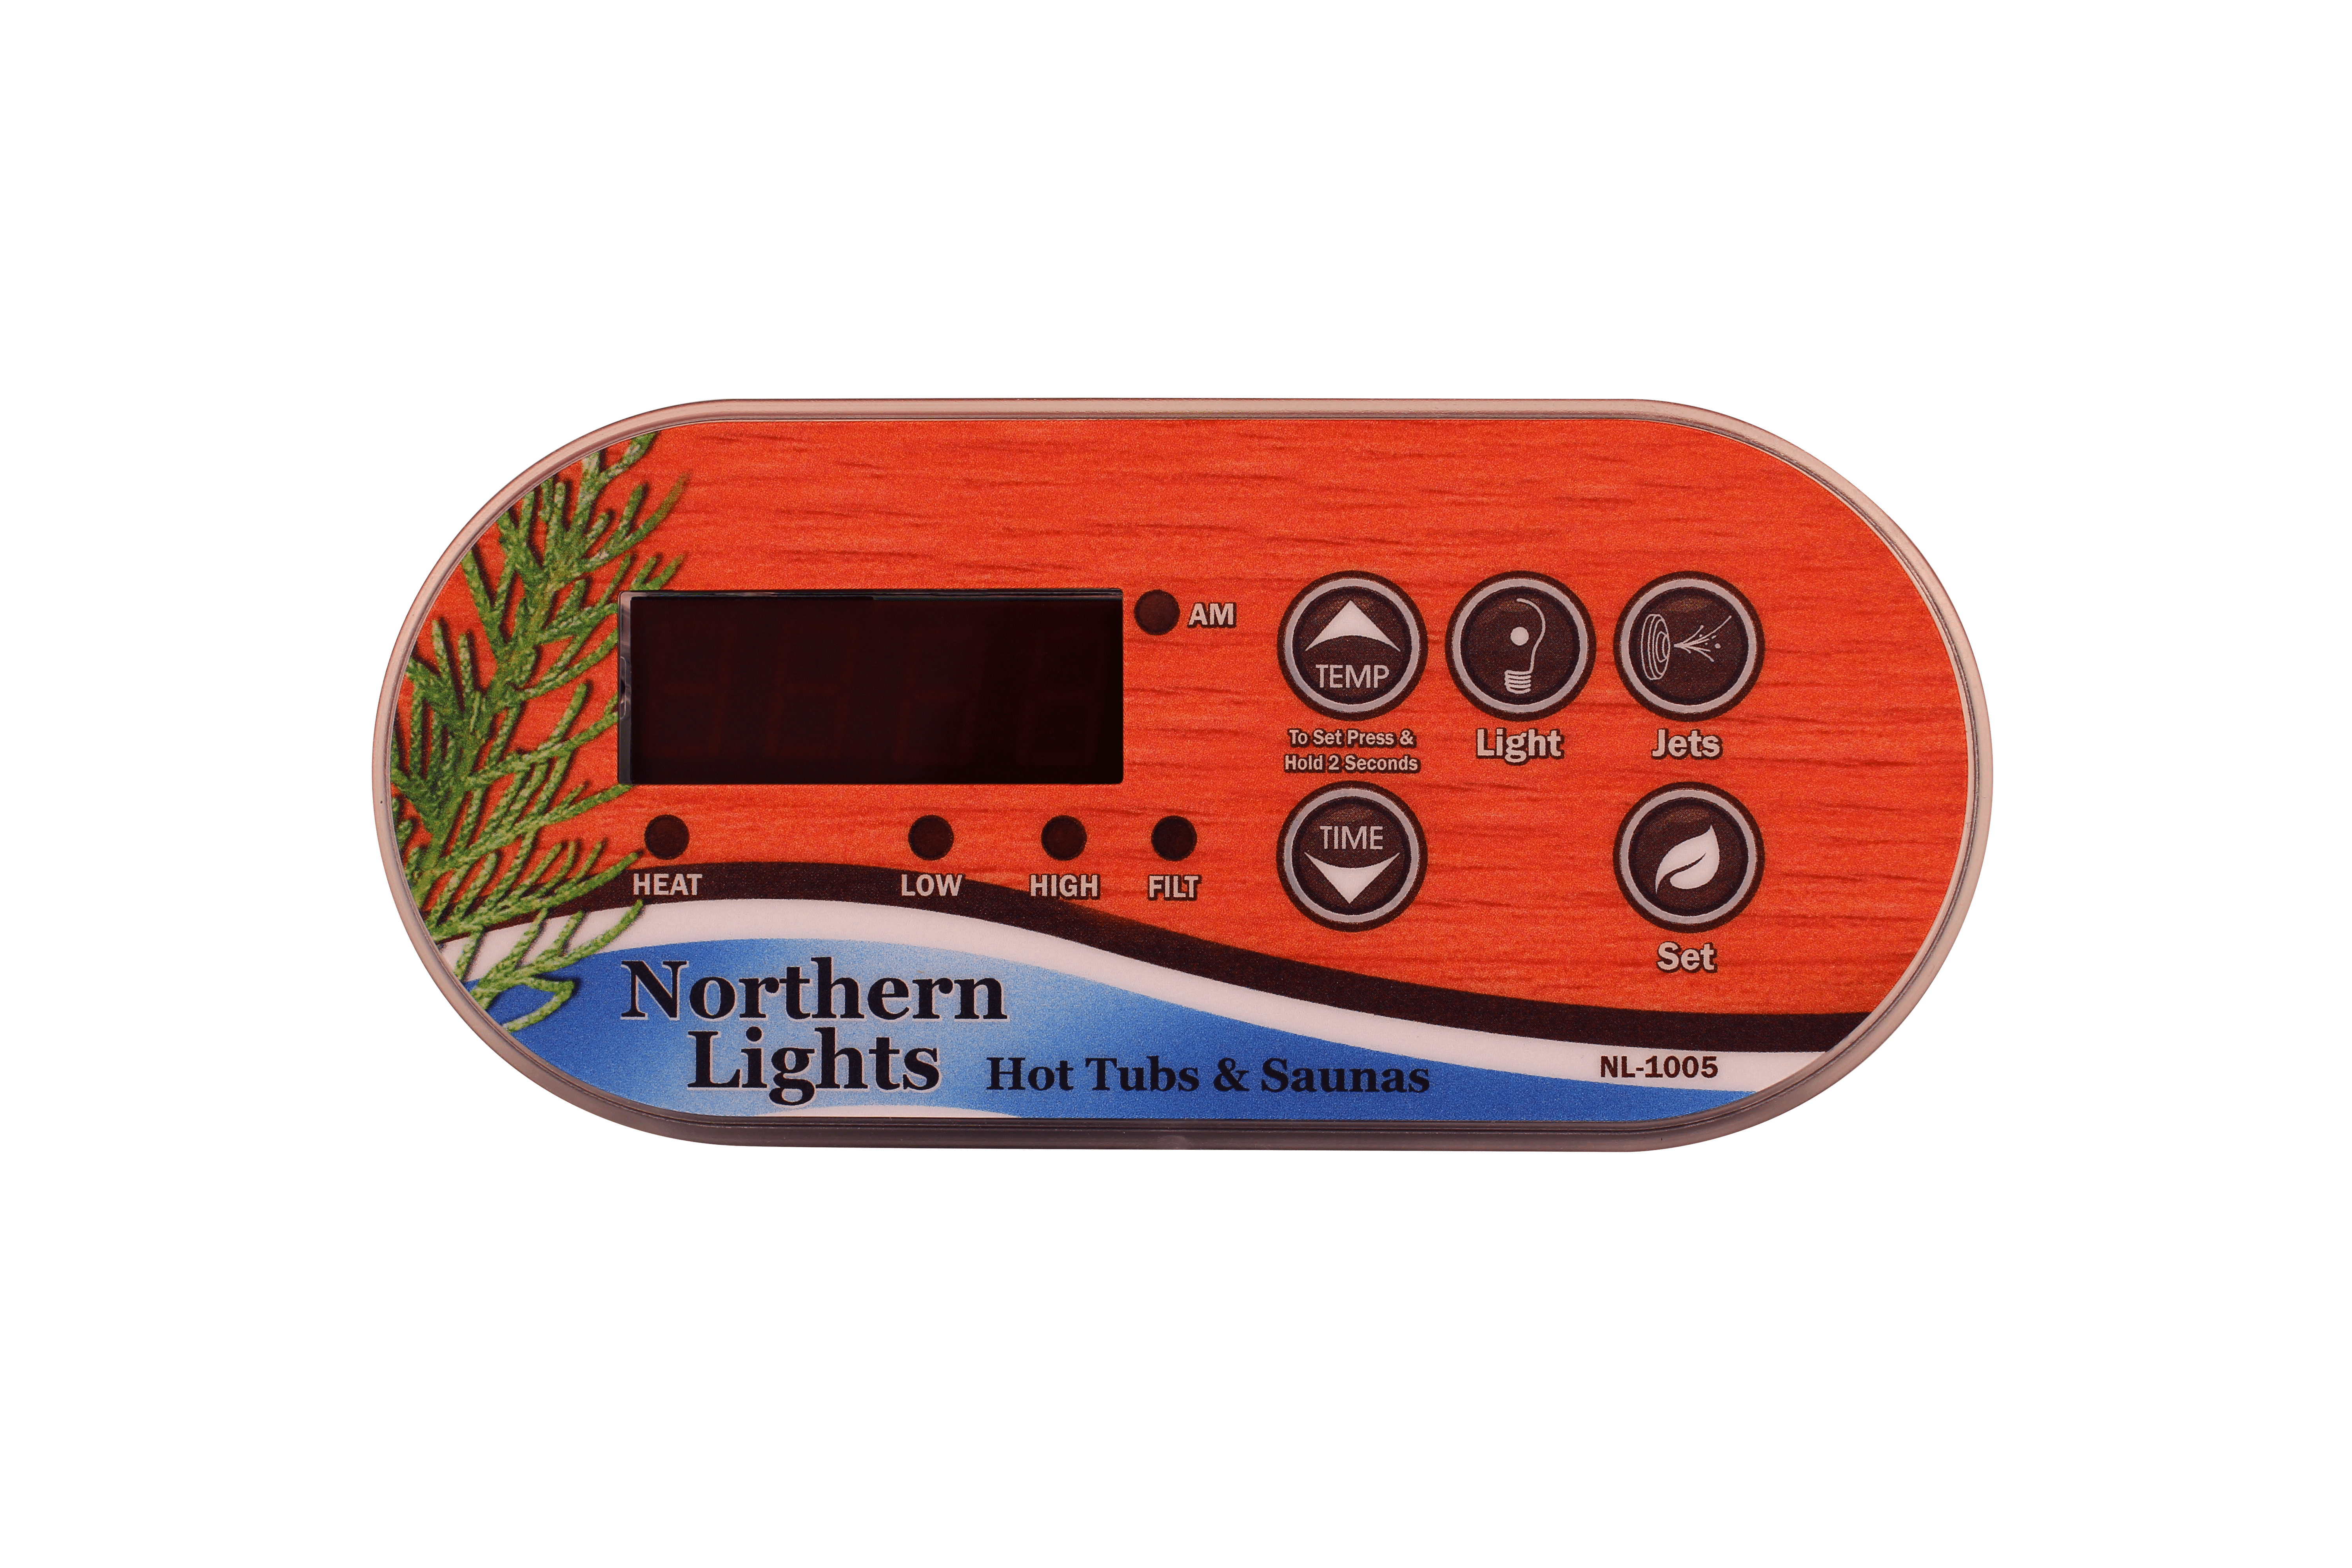 Northern Lights ACC Smartouch Digital 1000 Spa Control System